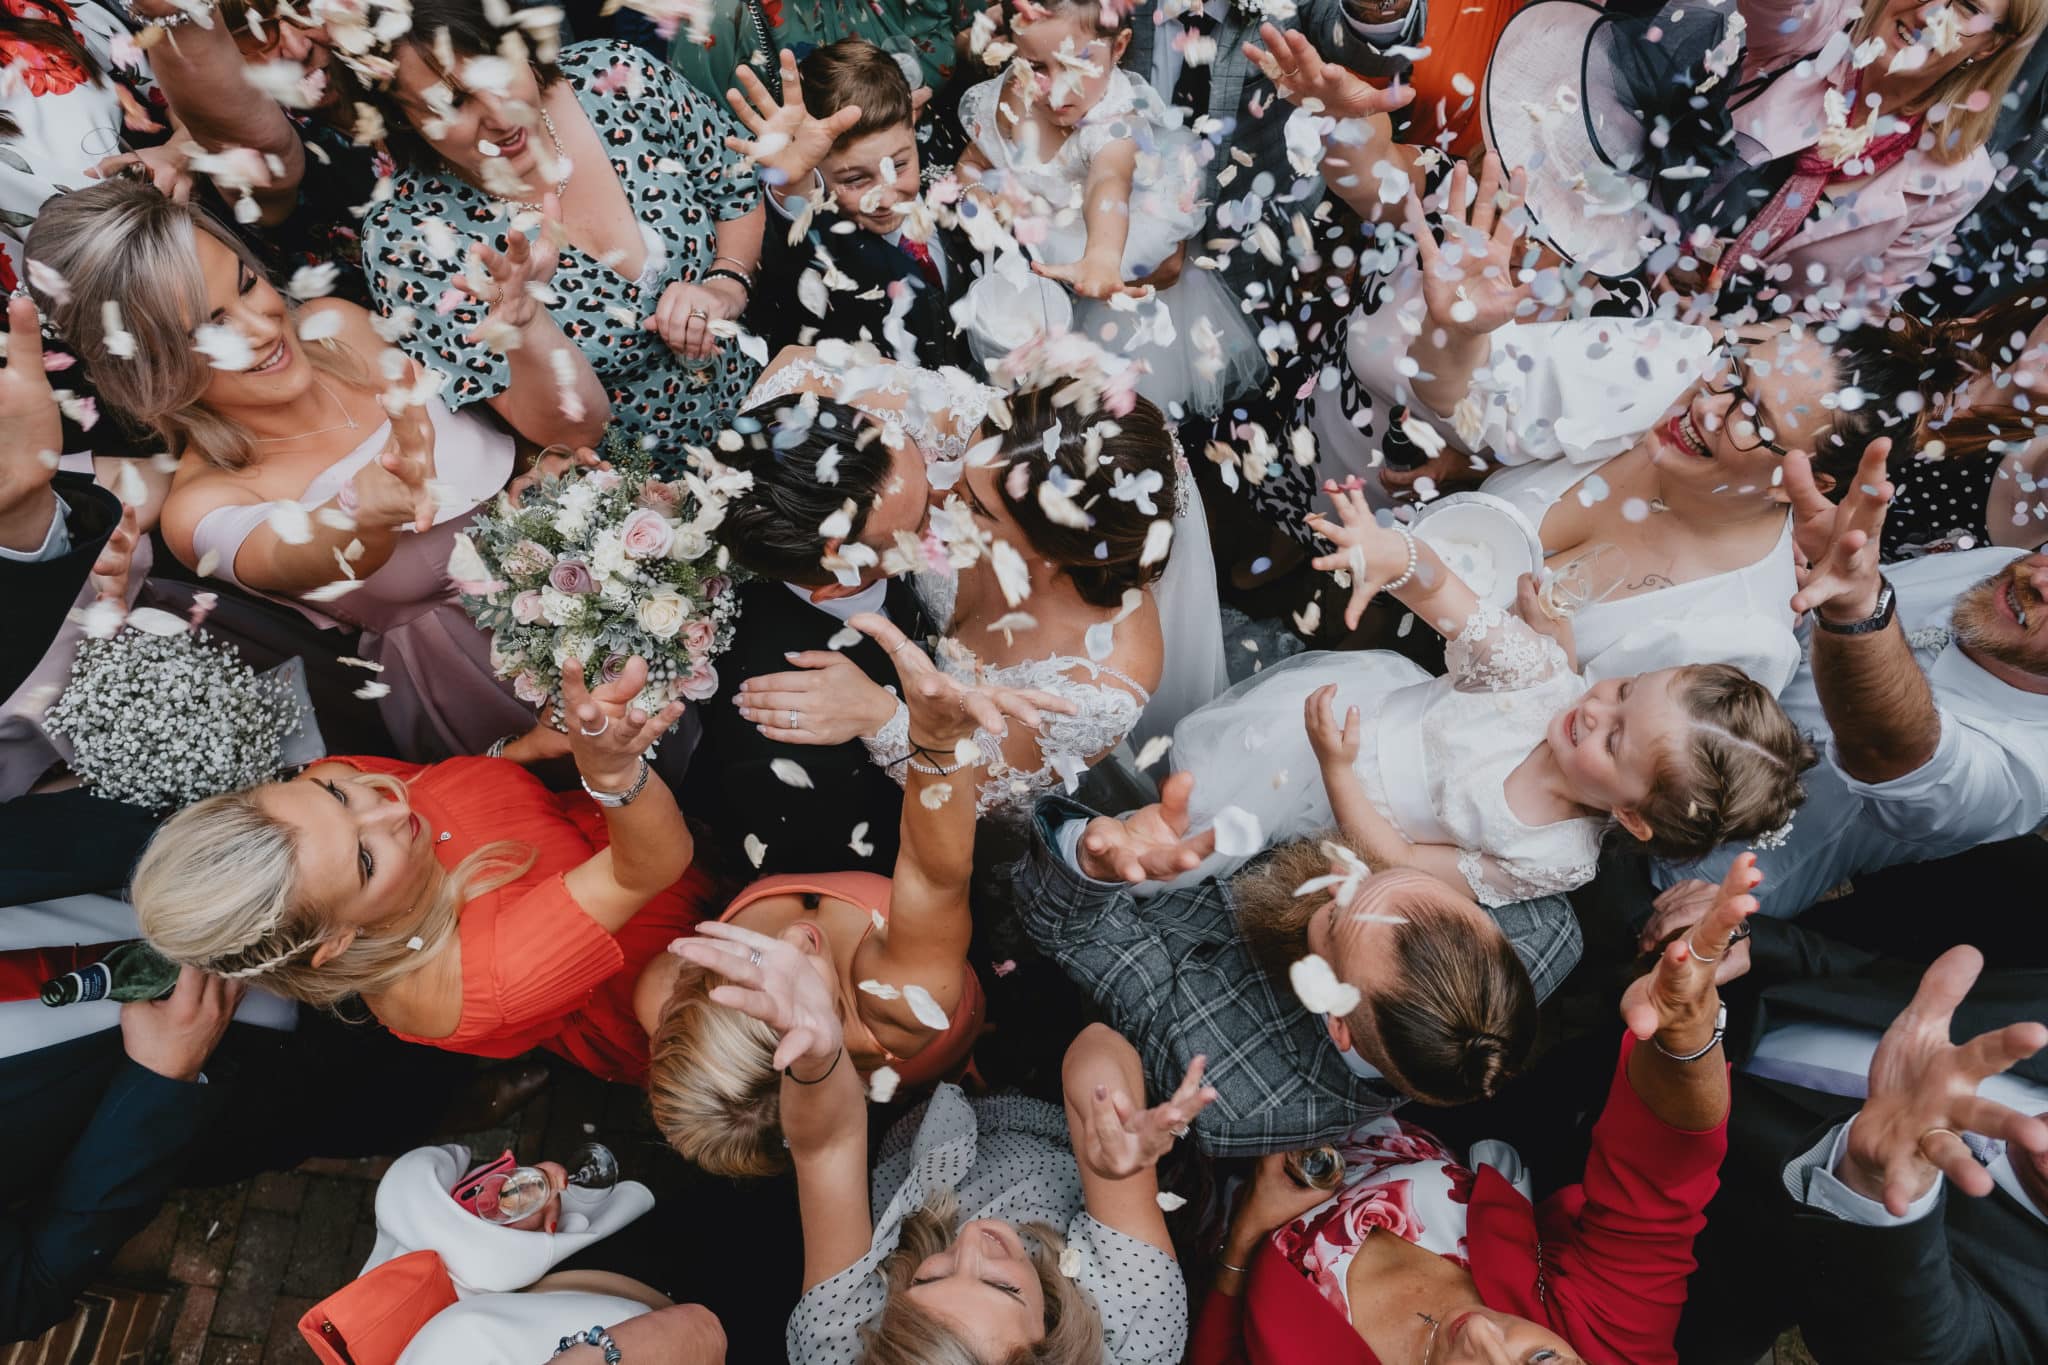 People surrounding a newly wed couple that are kissing under the confetti